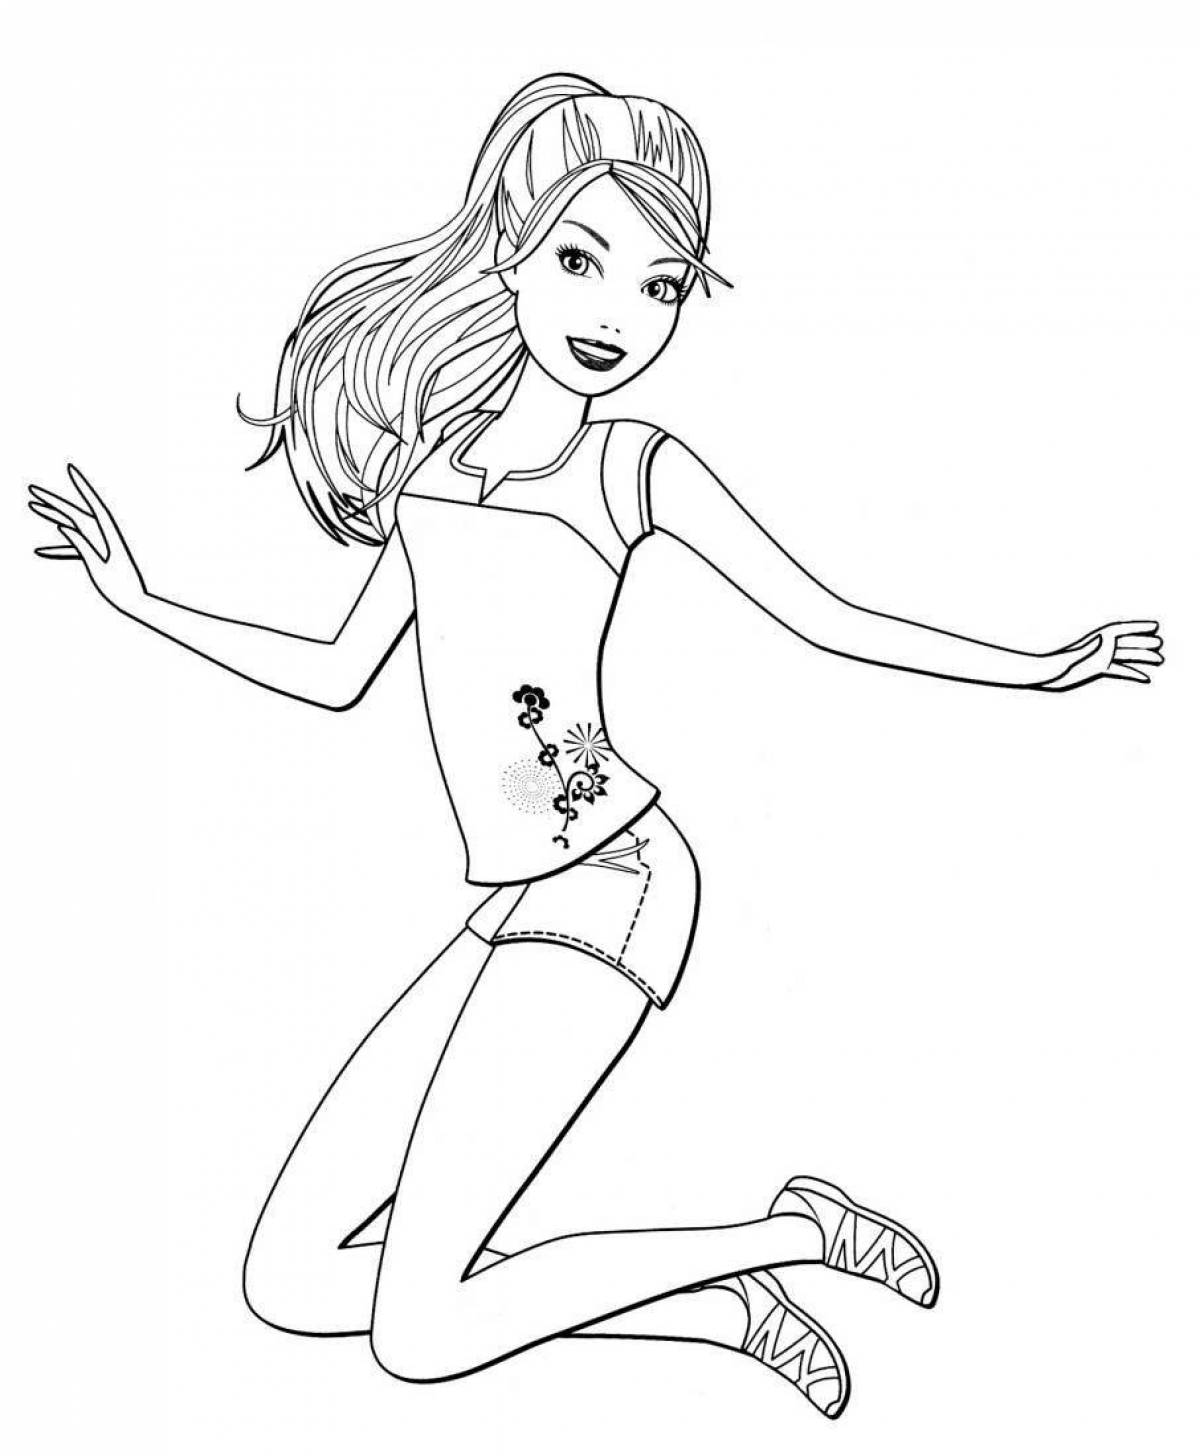 Coloring page glowing barbie in a bathing suit